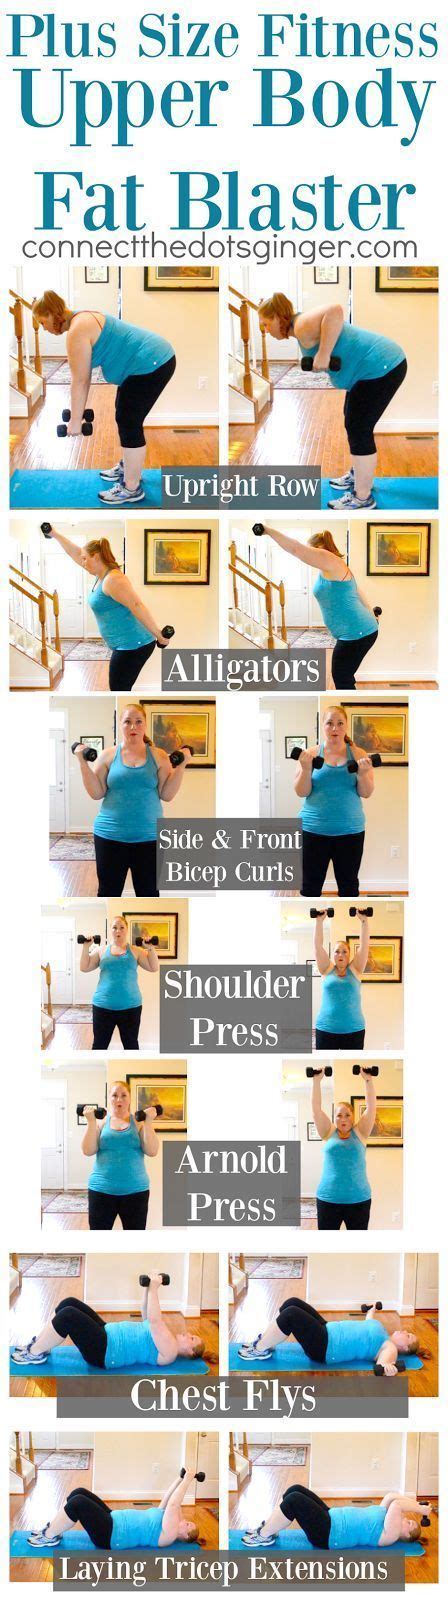 Plus Size Fitness Upper Body Fat Blasting Workout At Home Exercise Moms Beginner